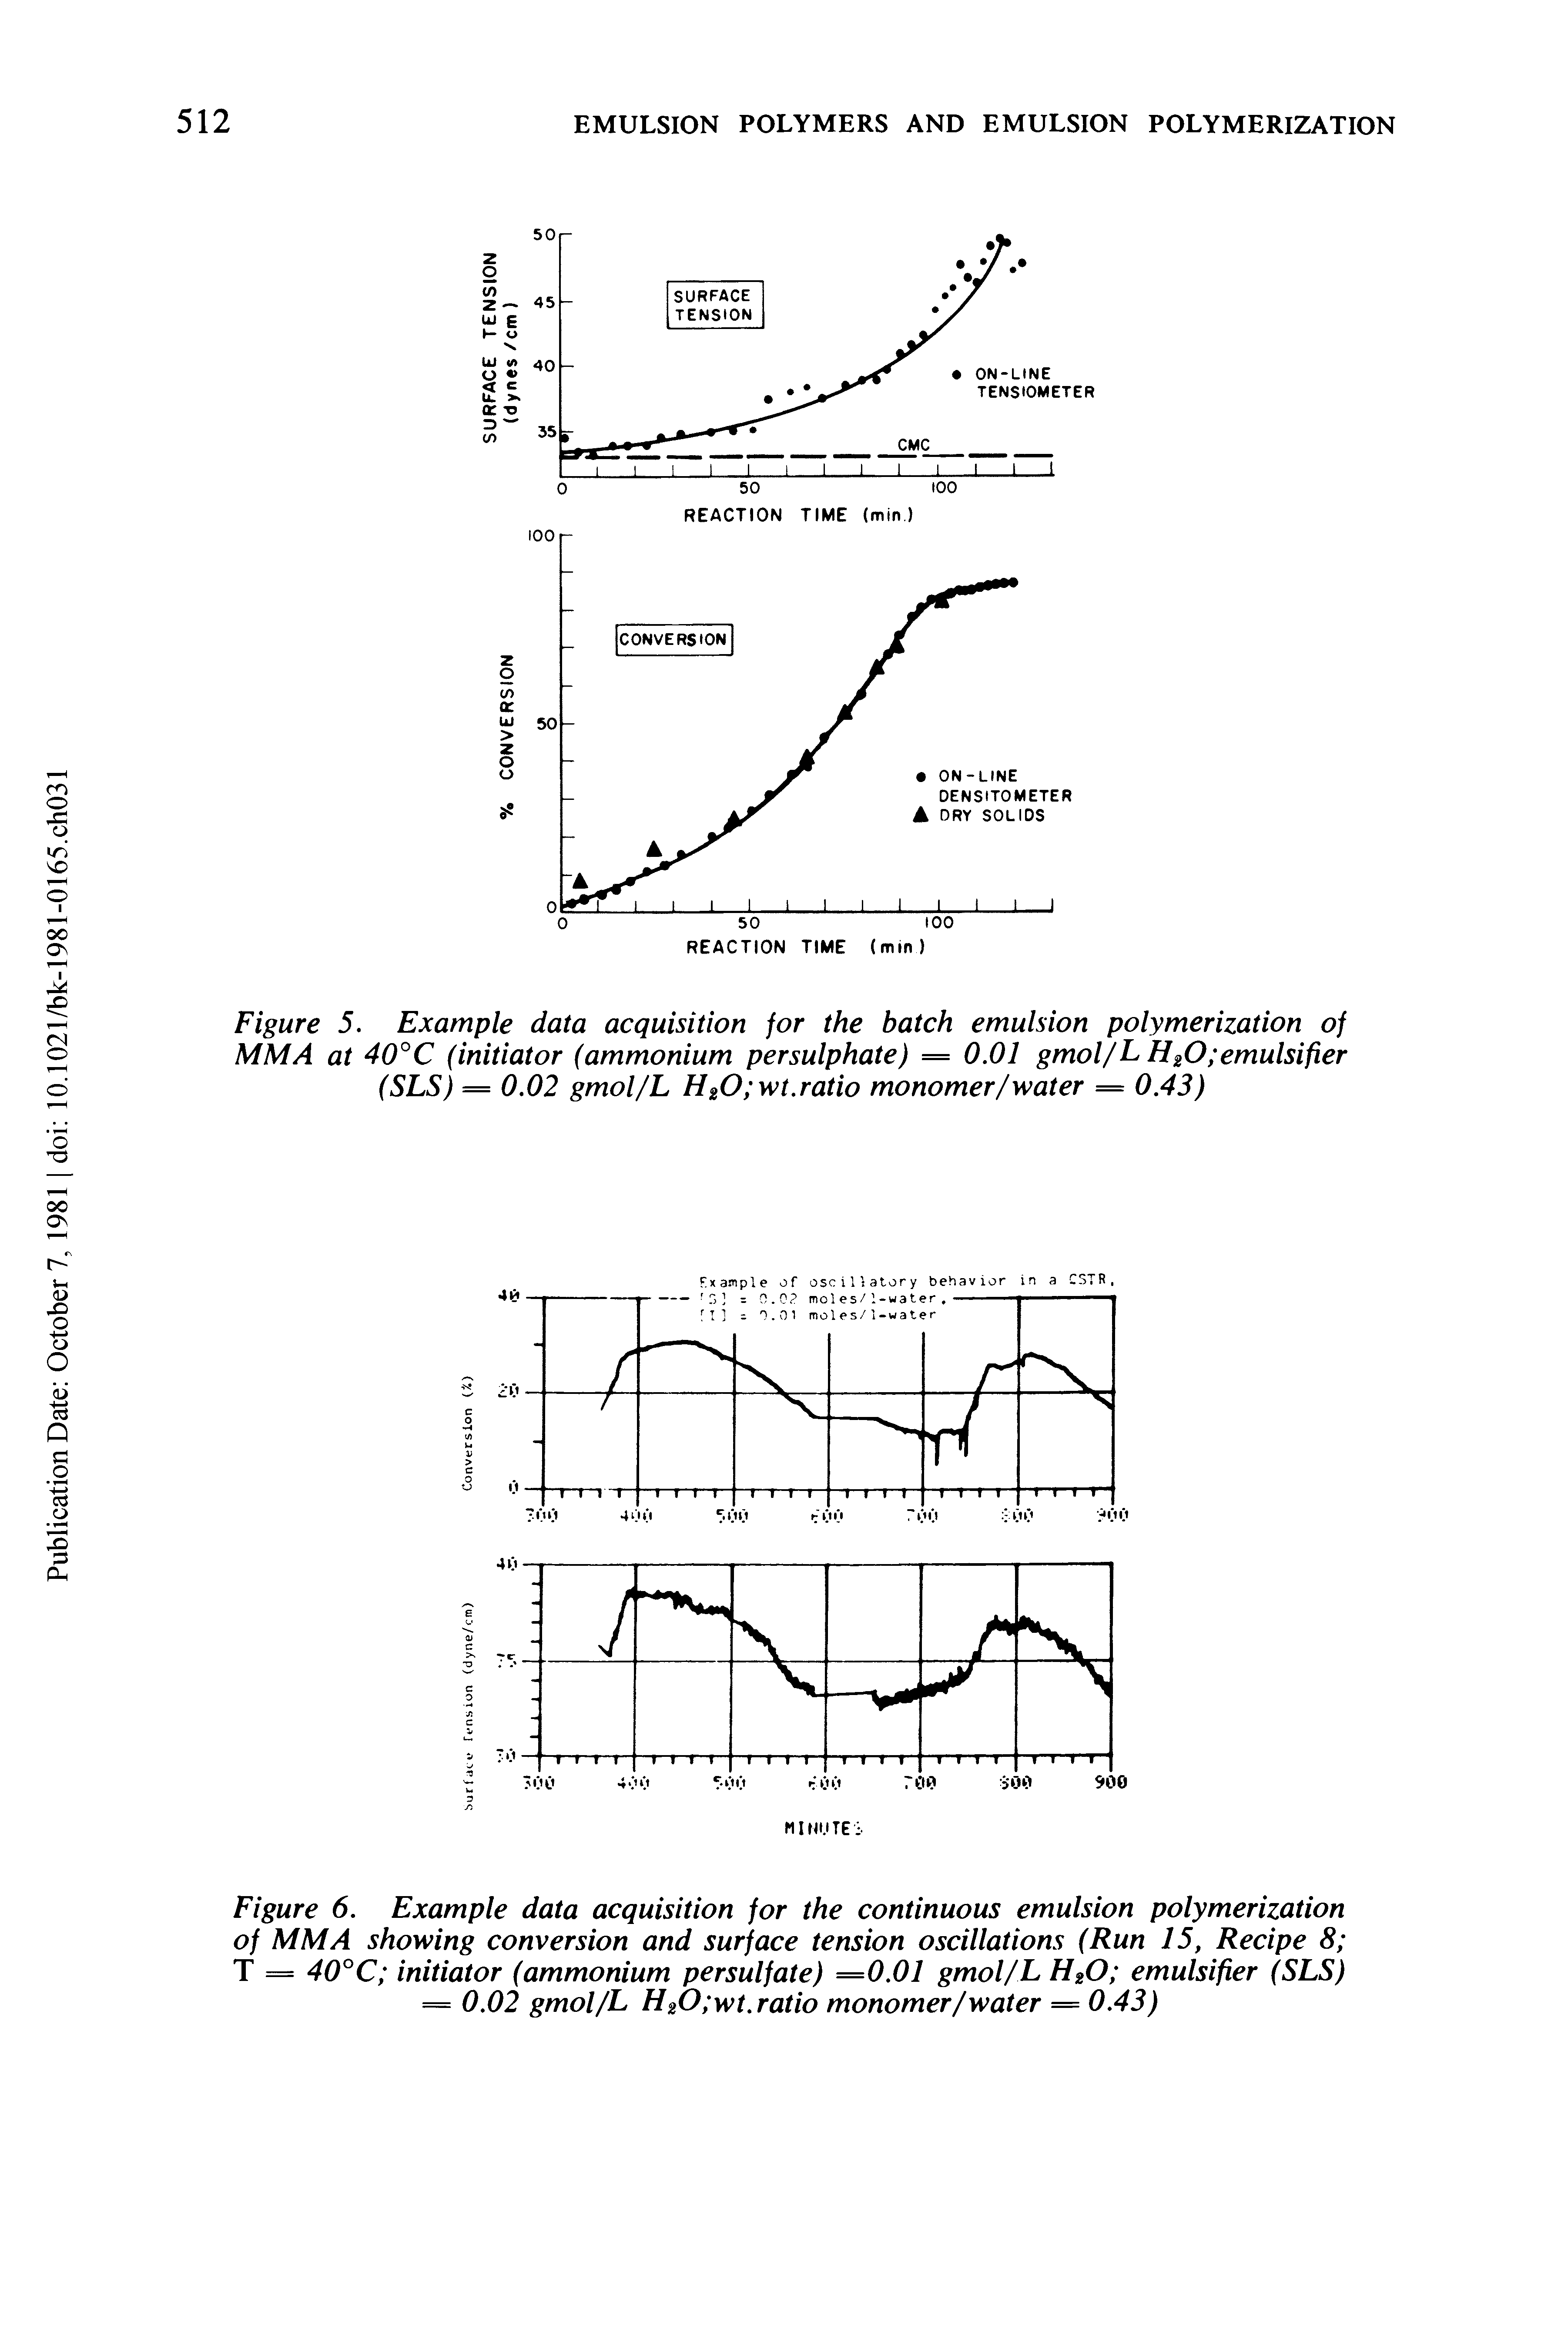 Figure 6. Example data acquisition for the continuous emulsion polymerization of MM A showing conversion and surface tension oscillations (Run 15, Recipe 8 T = 40°C initiator (ammonium persulfate) =0.01 gmol/L H20 emulsifier (SLS) = 0.02 gmol/L H20 wt. ratio monomer/water = 0.43)...